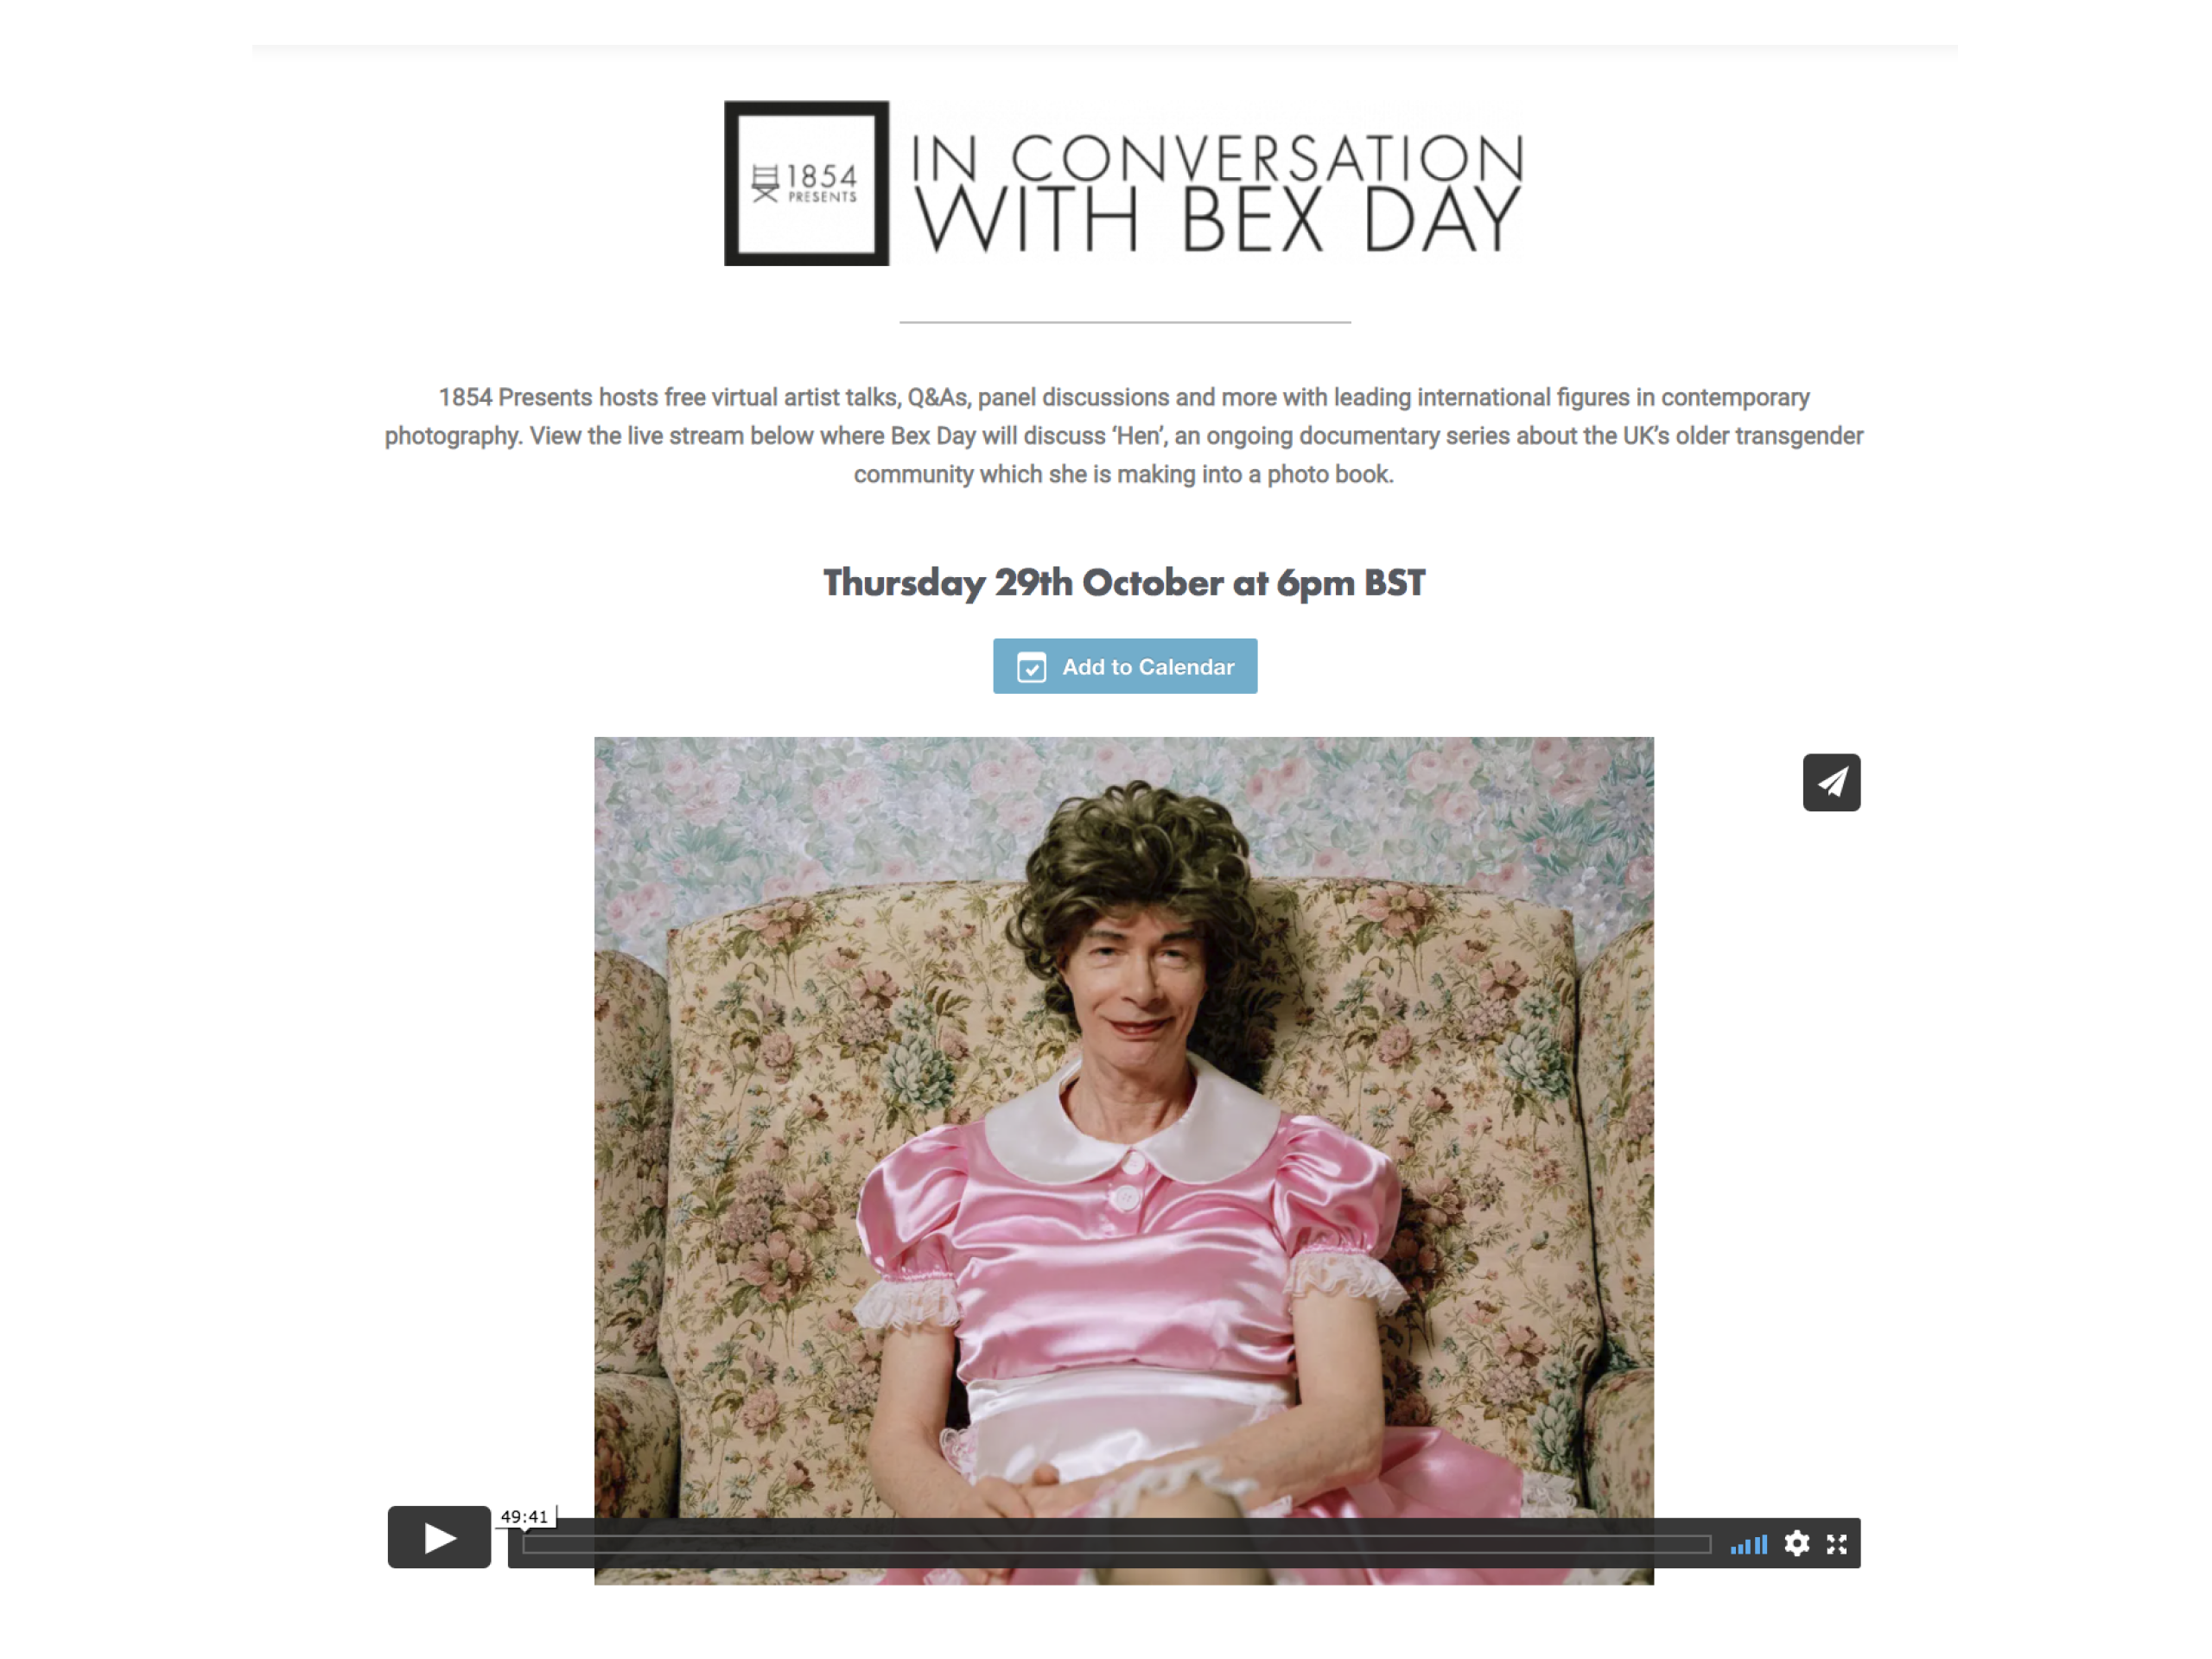 THE BRITISH JOURNAL OF PHOTOGRAPHY  in conversation with Bex Day